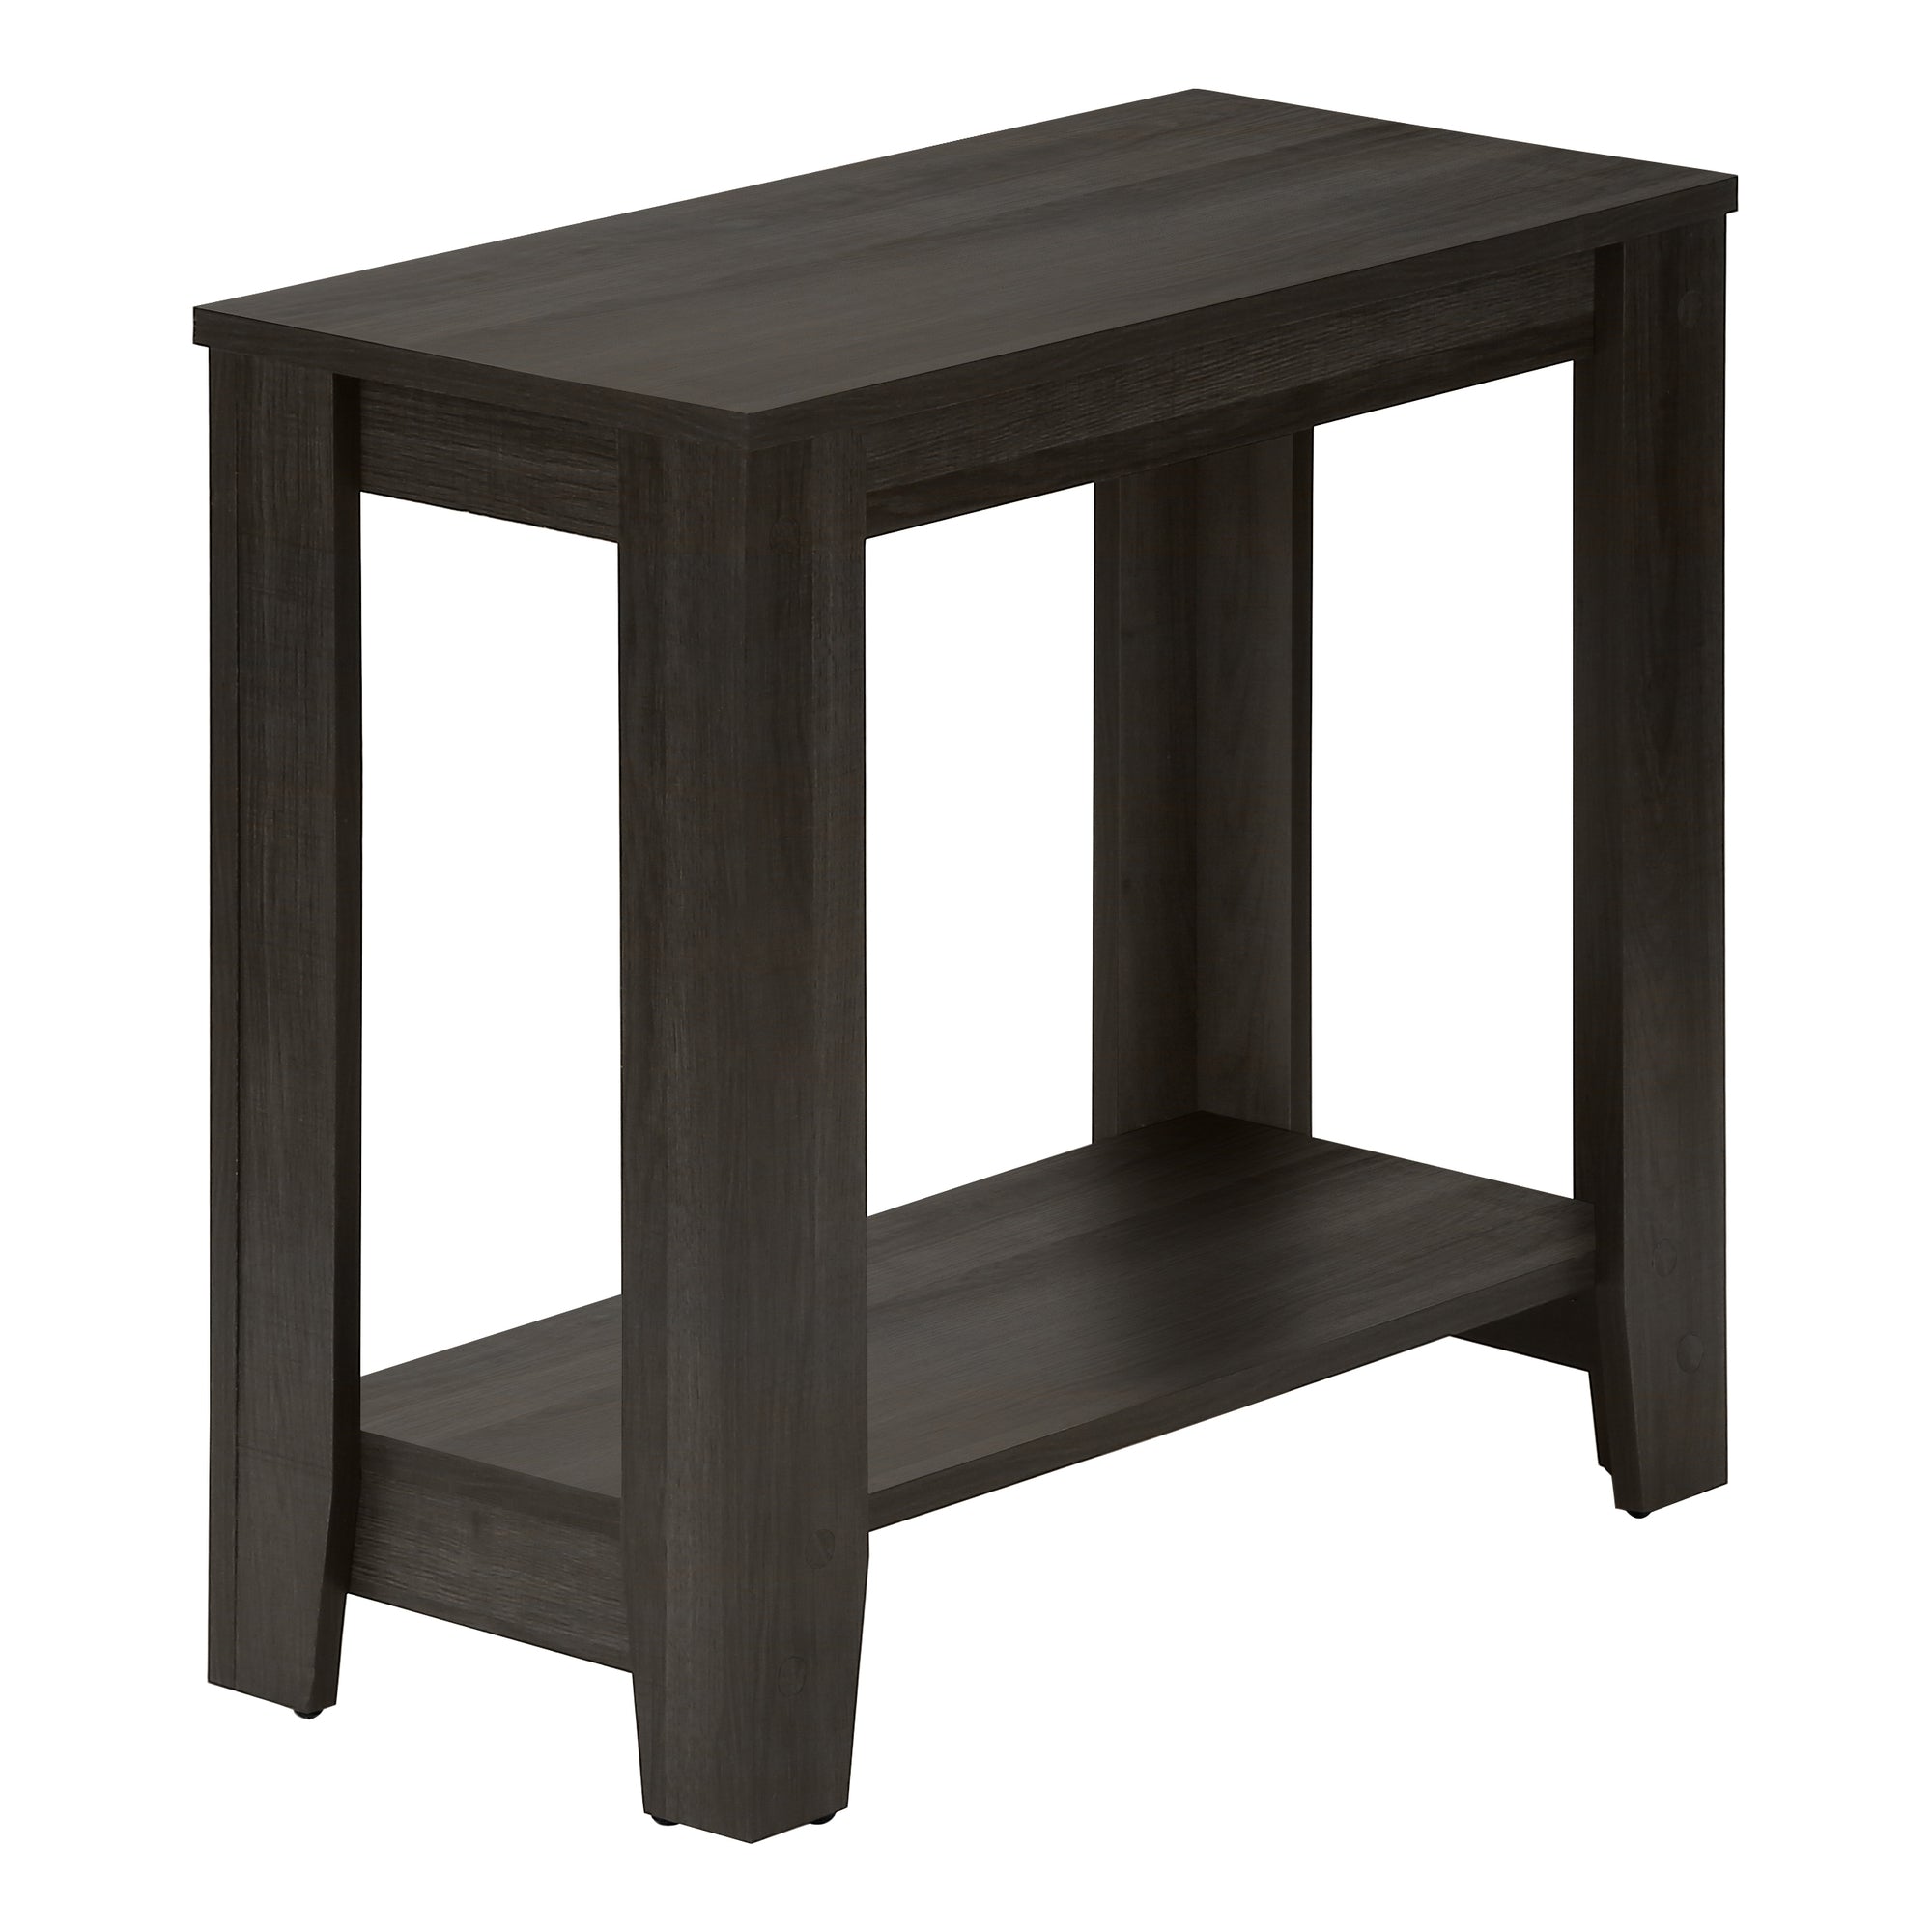 MN-413388    Accent Table, Side, End, Nightstand, Lamp, Living Room, Bedroom, Laminate, Brown Oak, Contemporary, Modern